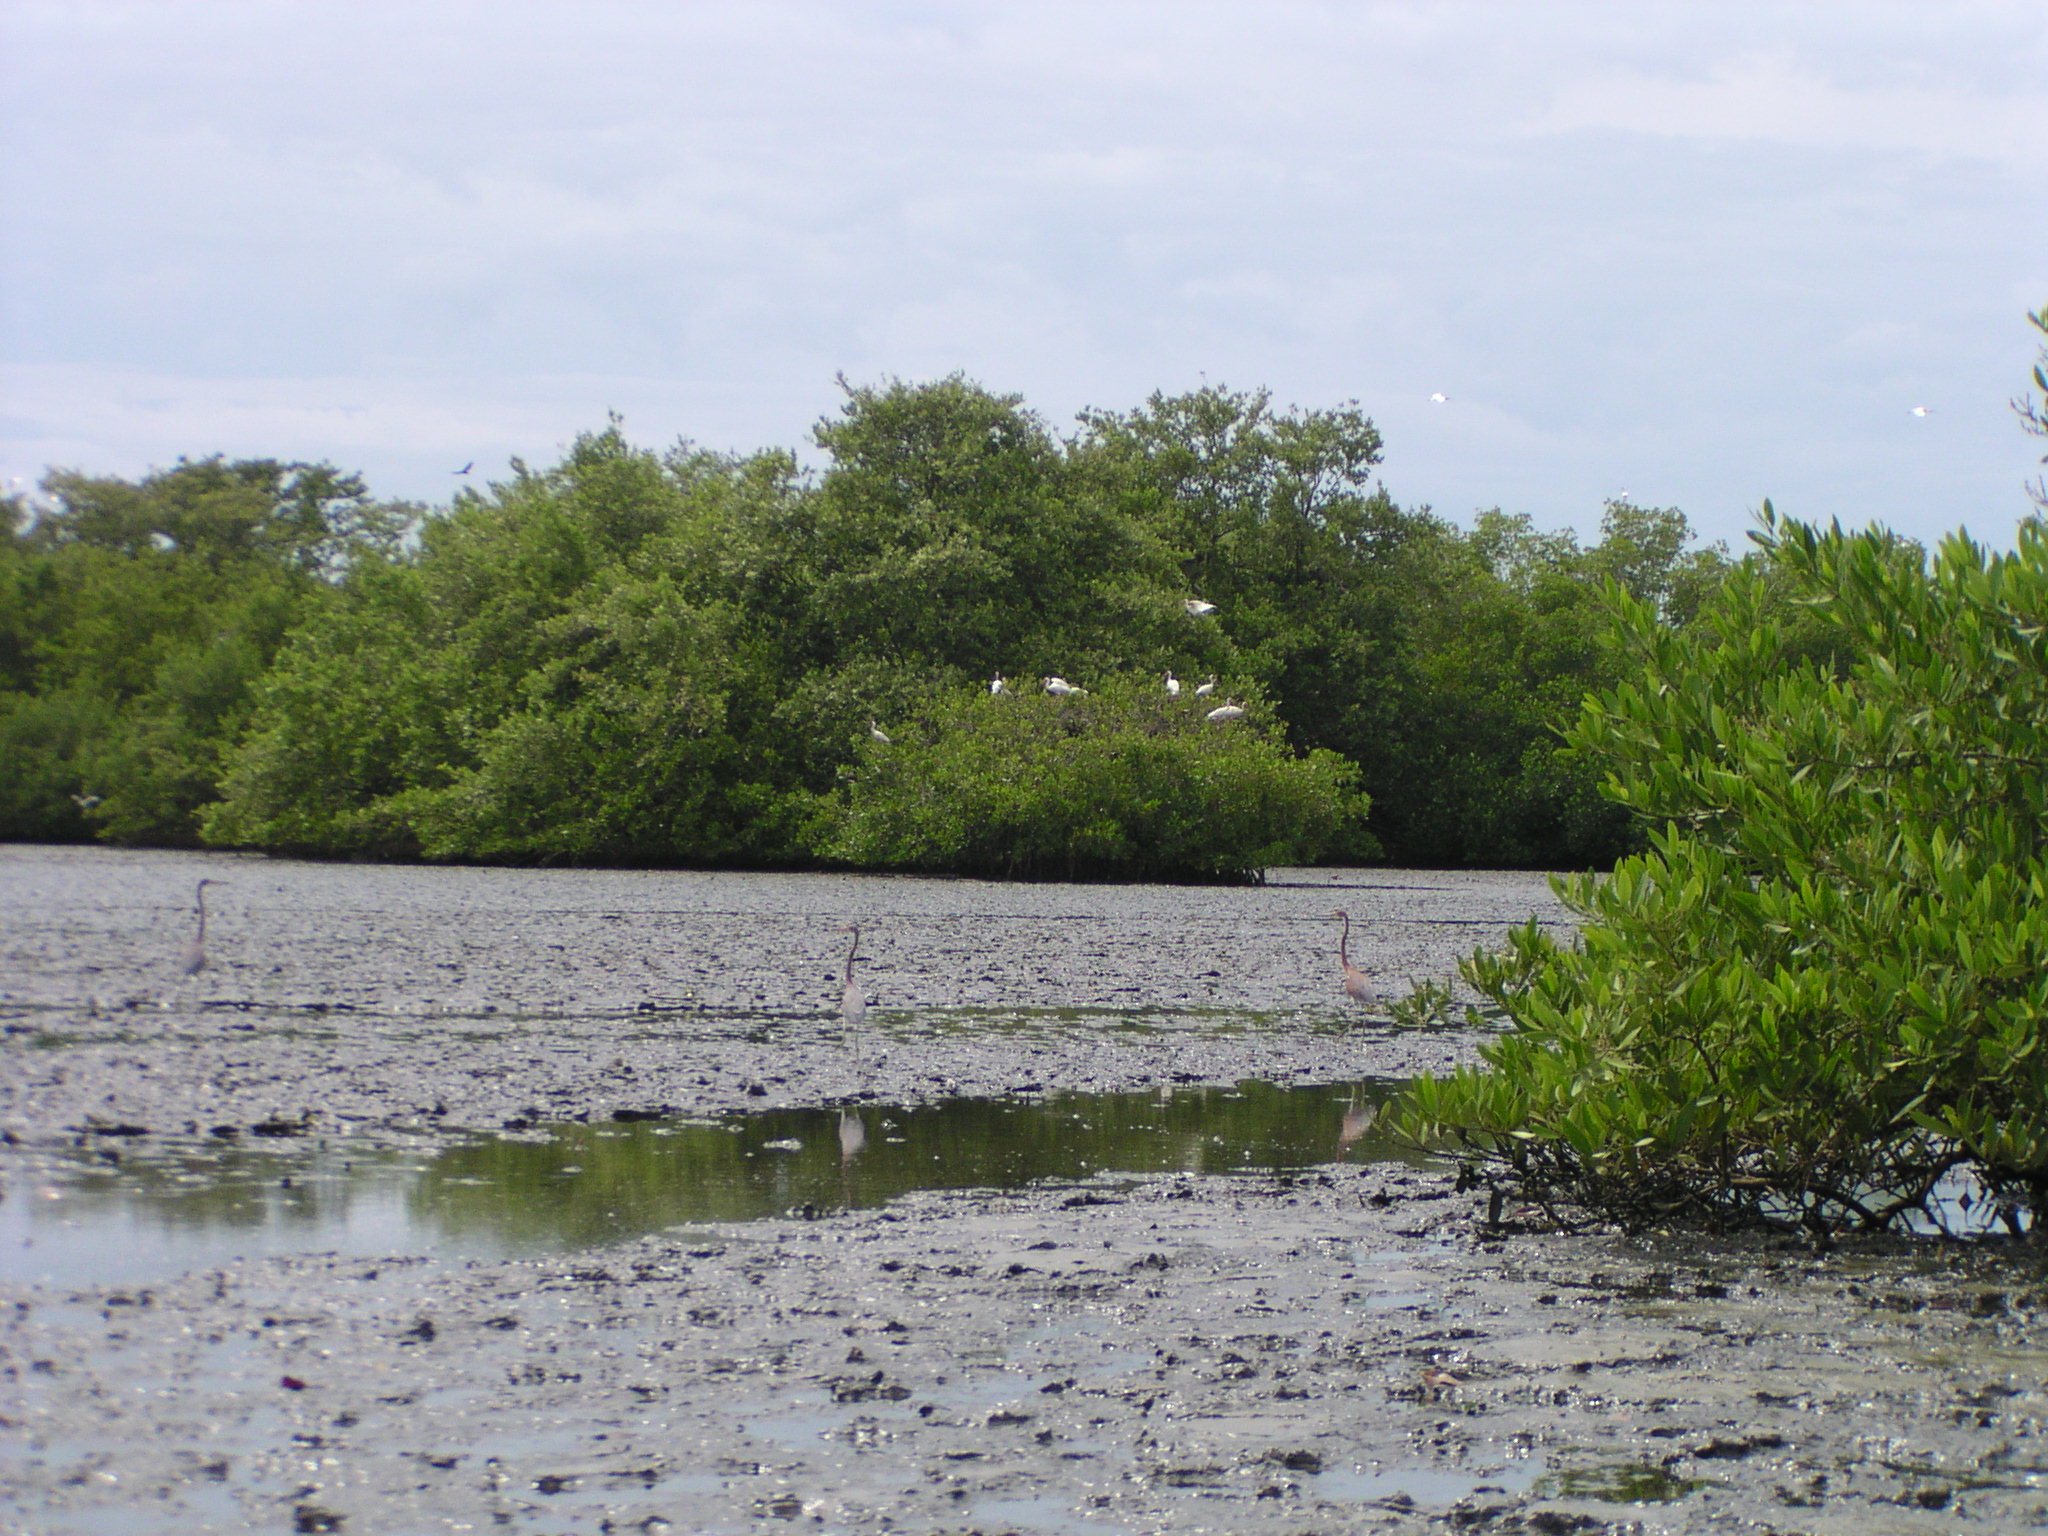 Mangrove forests reduce the damage that can be caused by natural events